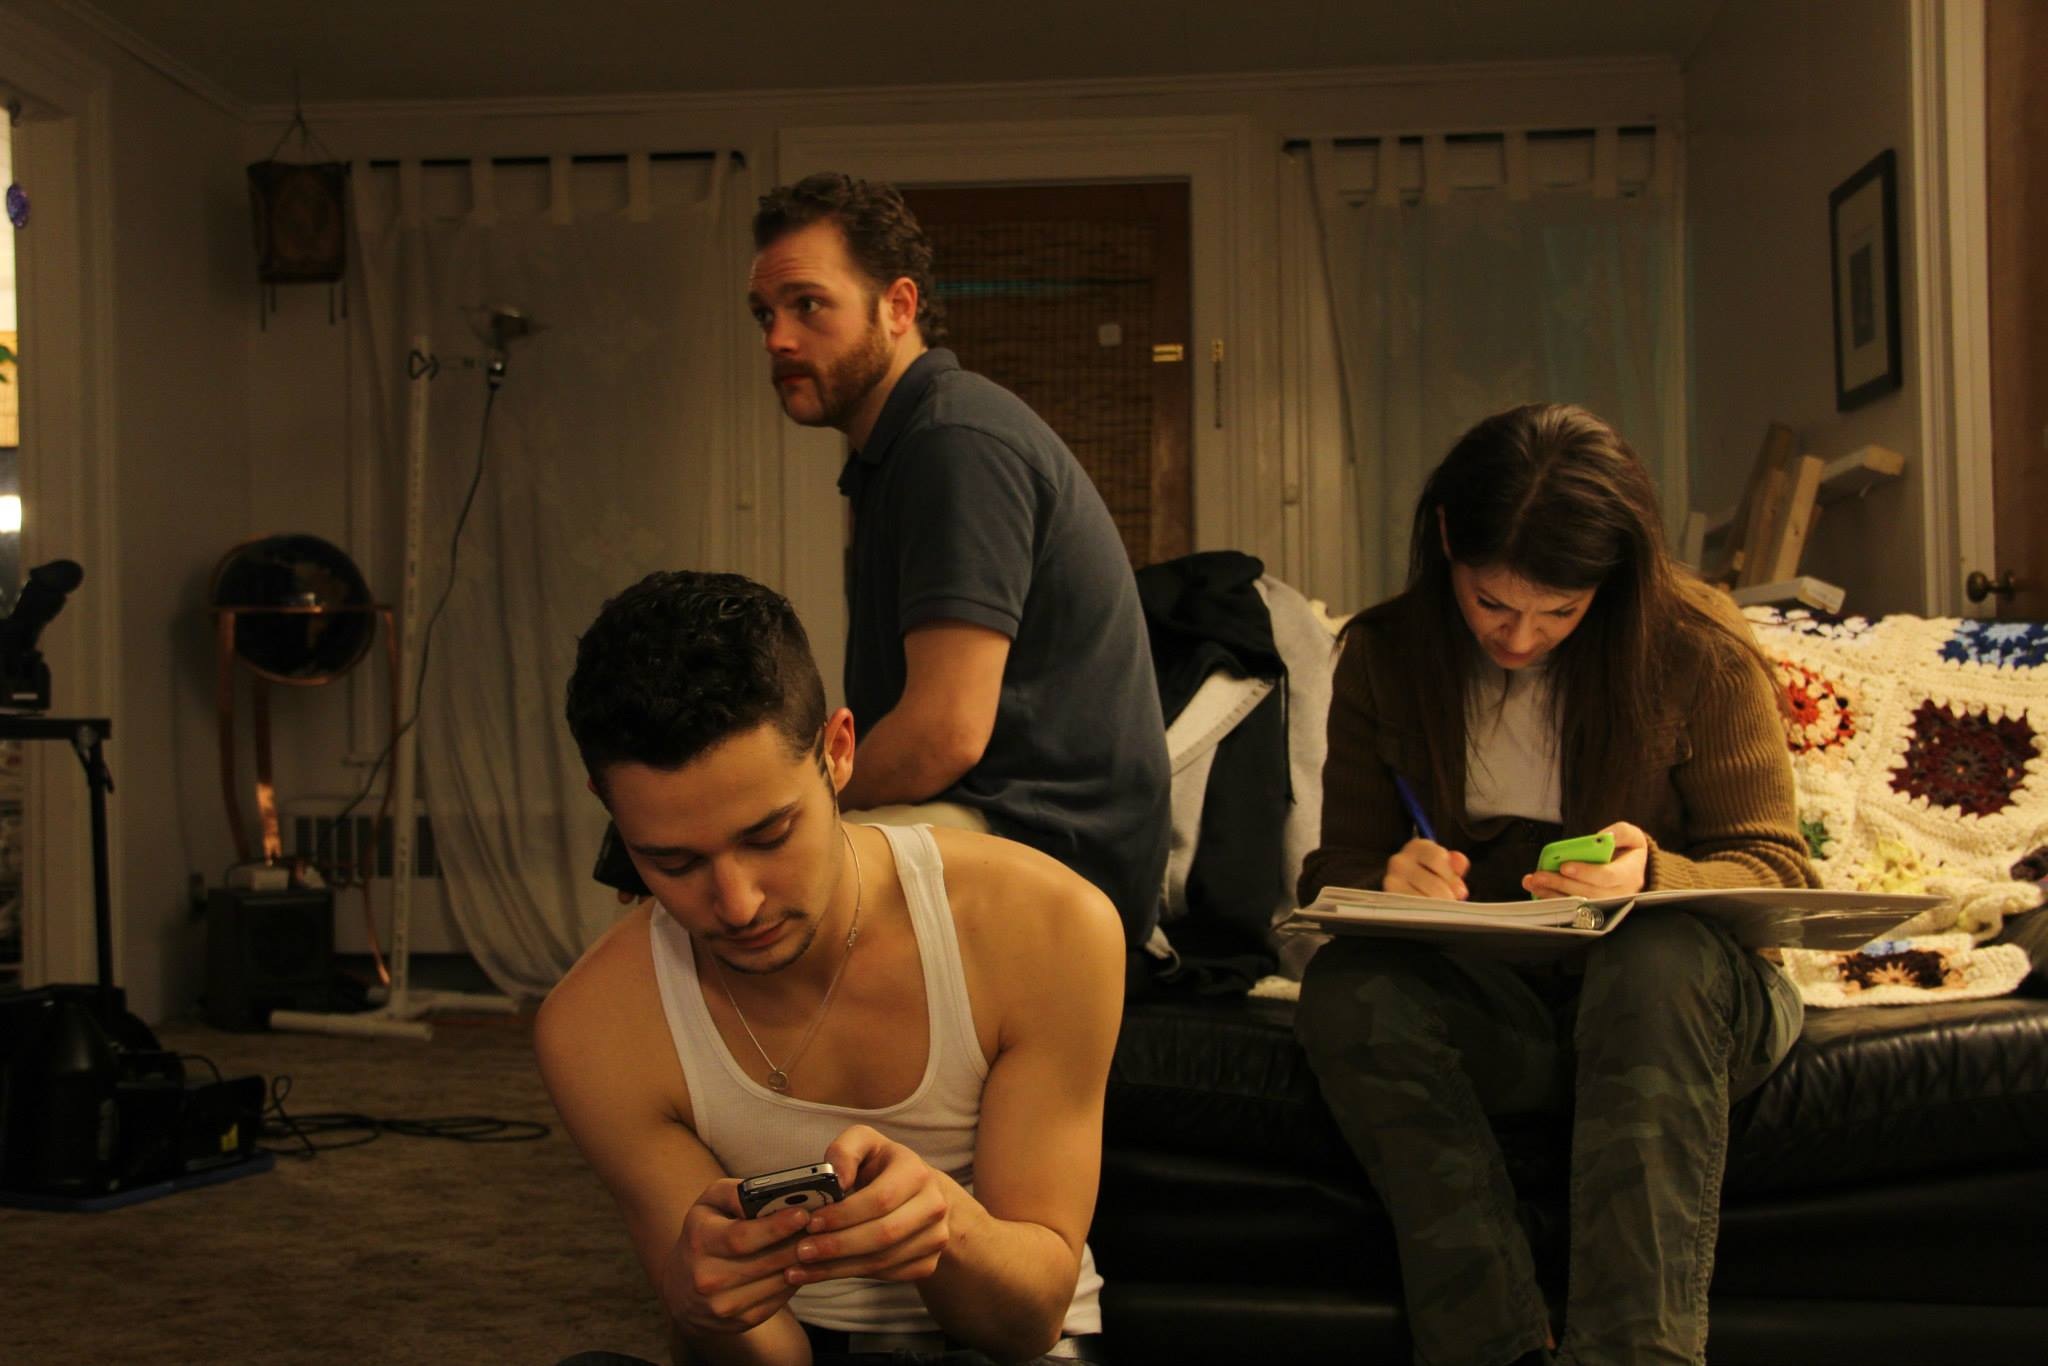 Reviewing lines with co-stars Joseph Giambra and Tyler Austin.